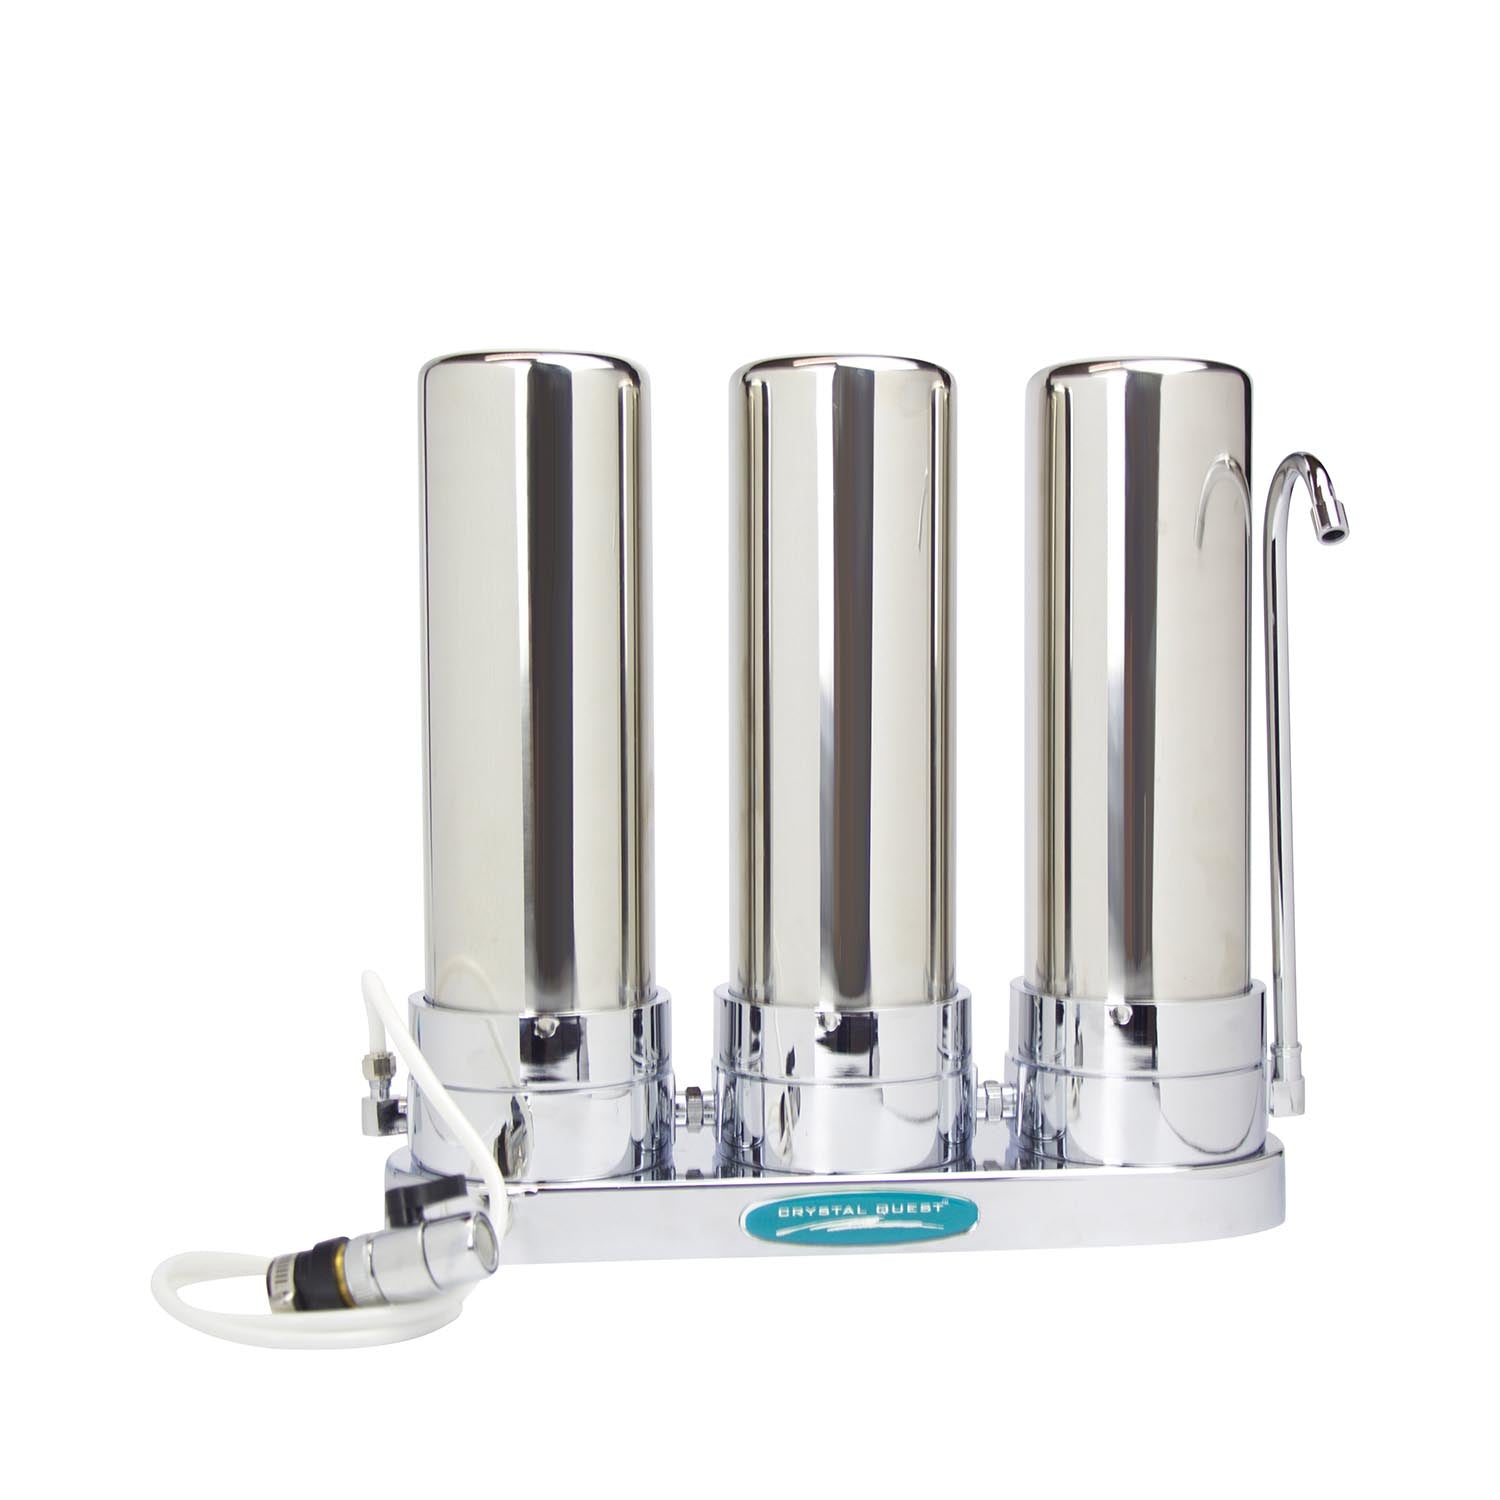 Crystal Quest SMART Countertop Water Filter System